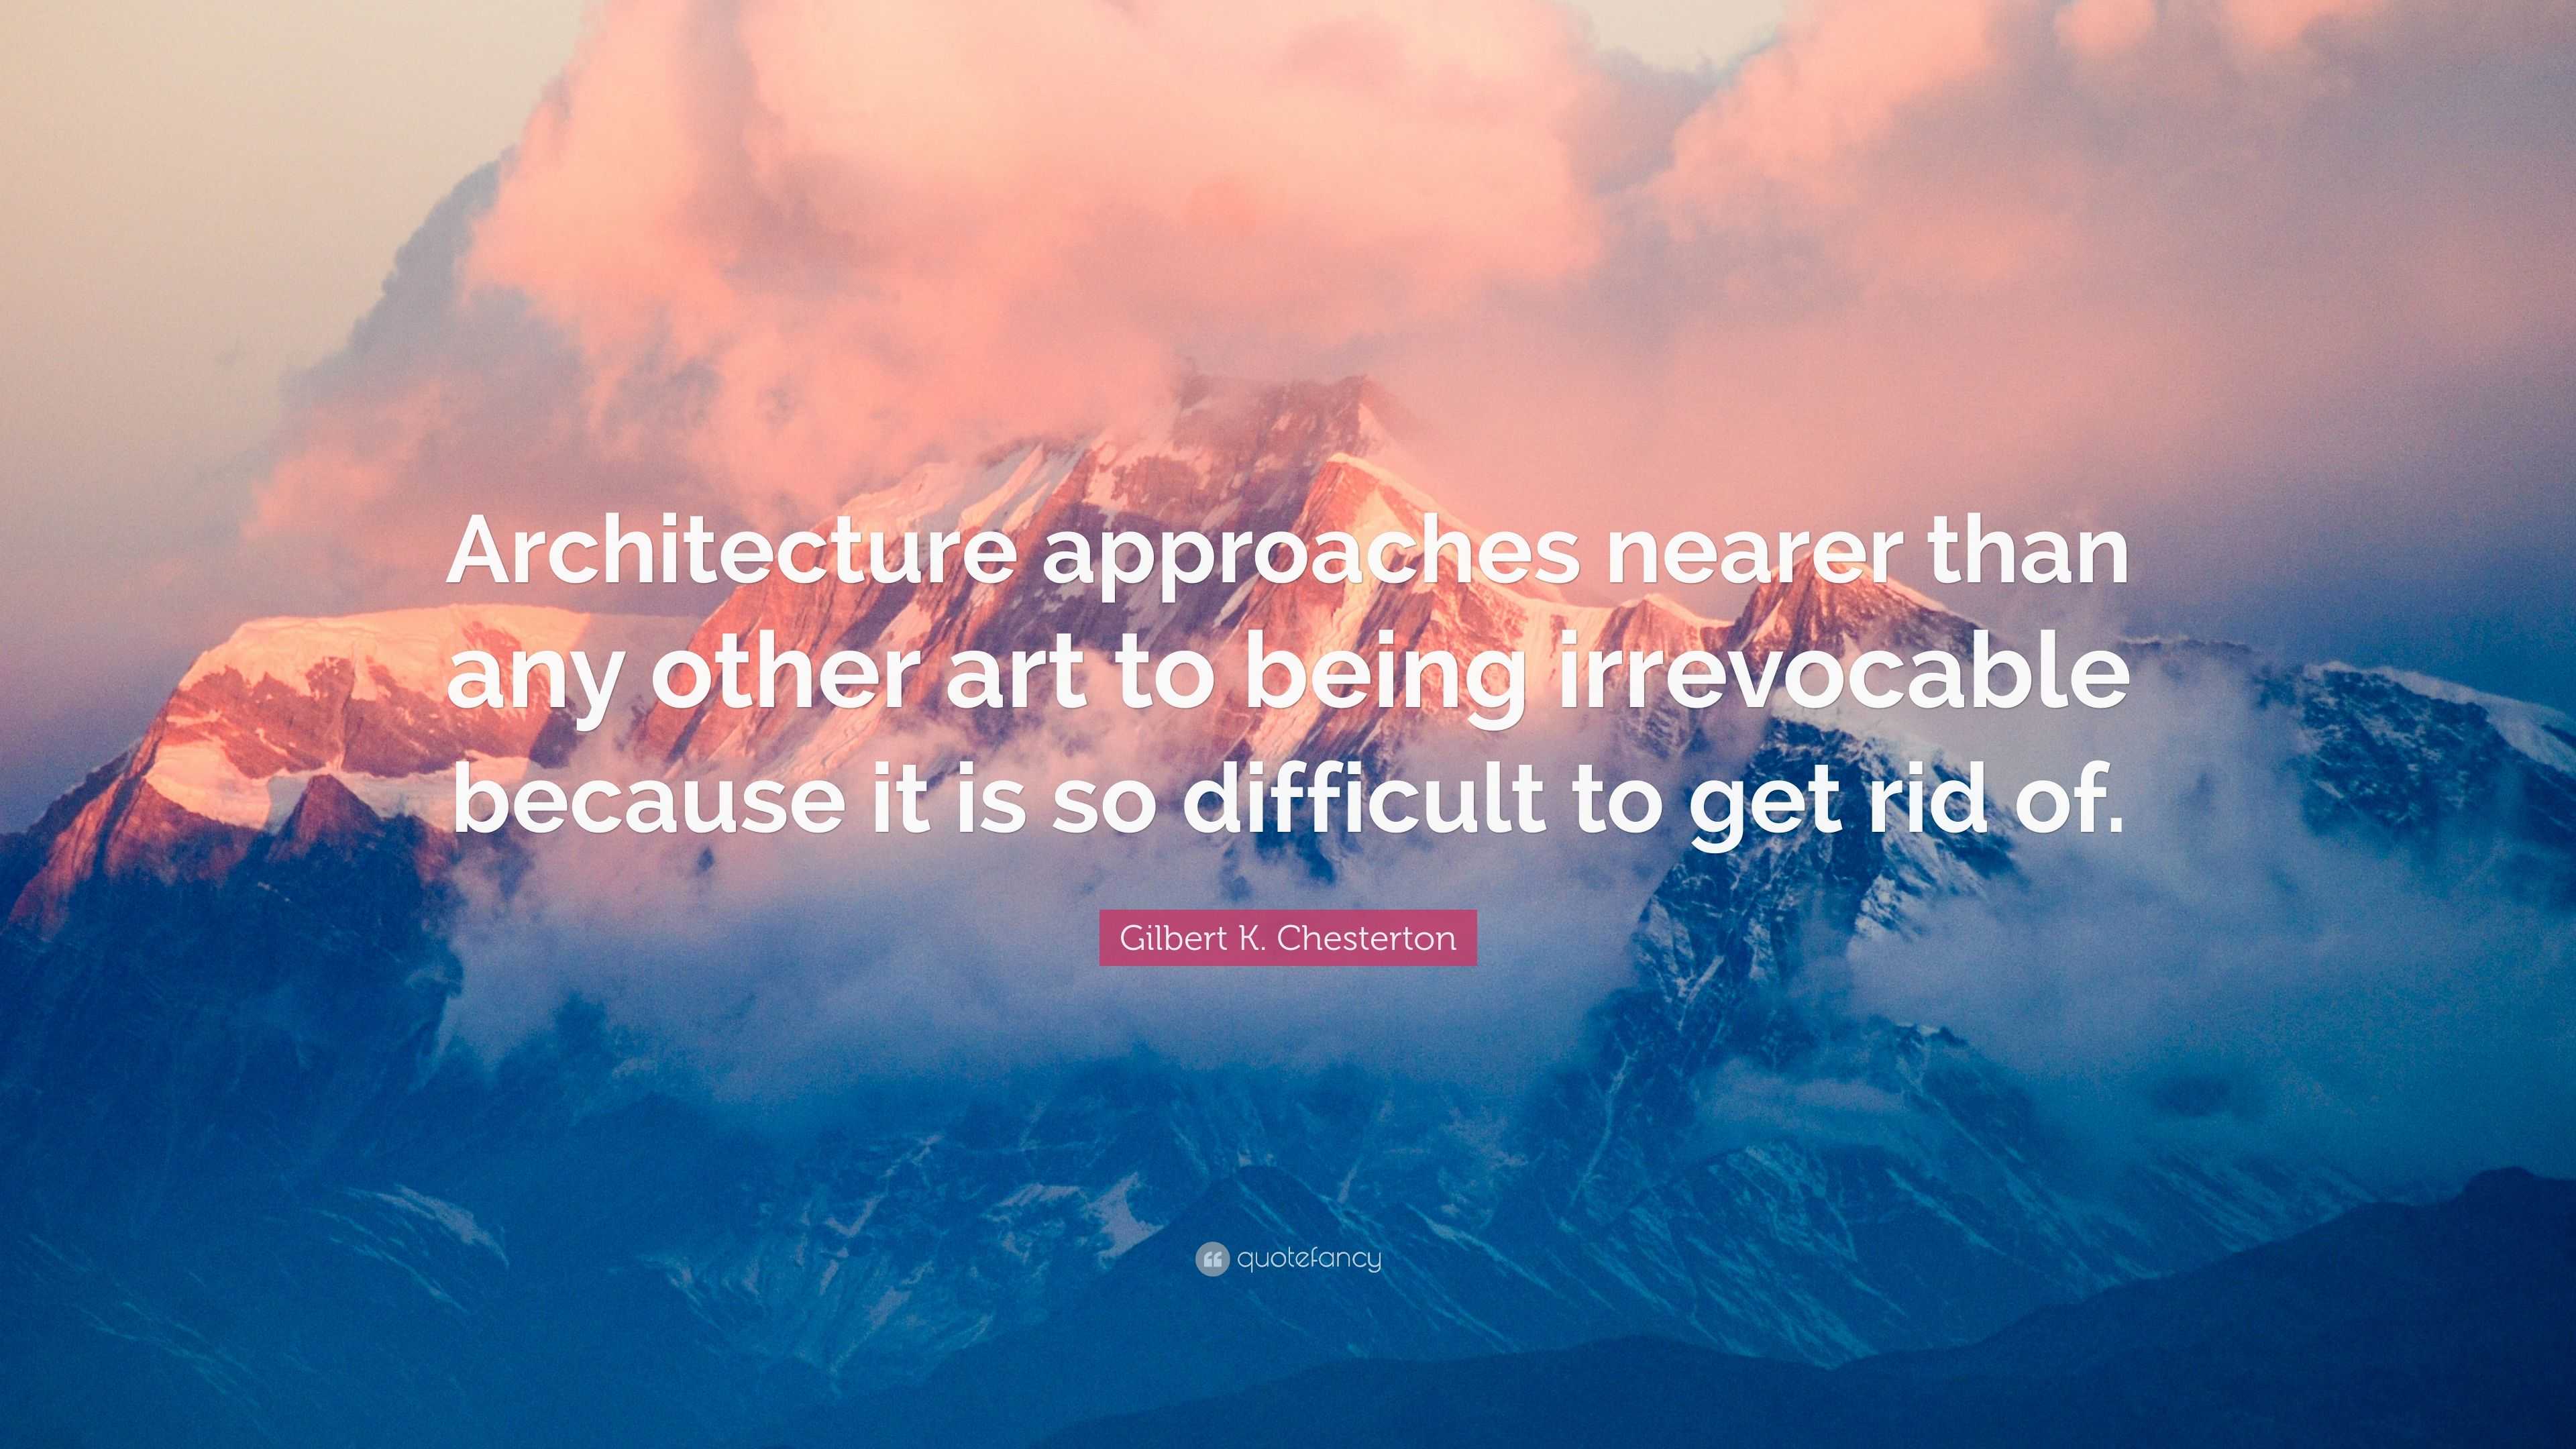 Gilbert K. Chesterton Quote: “Architecture approaches nearer than any ...